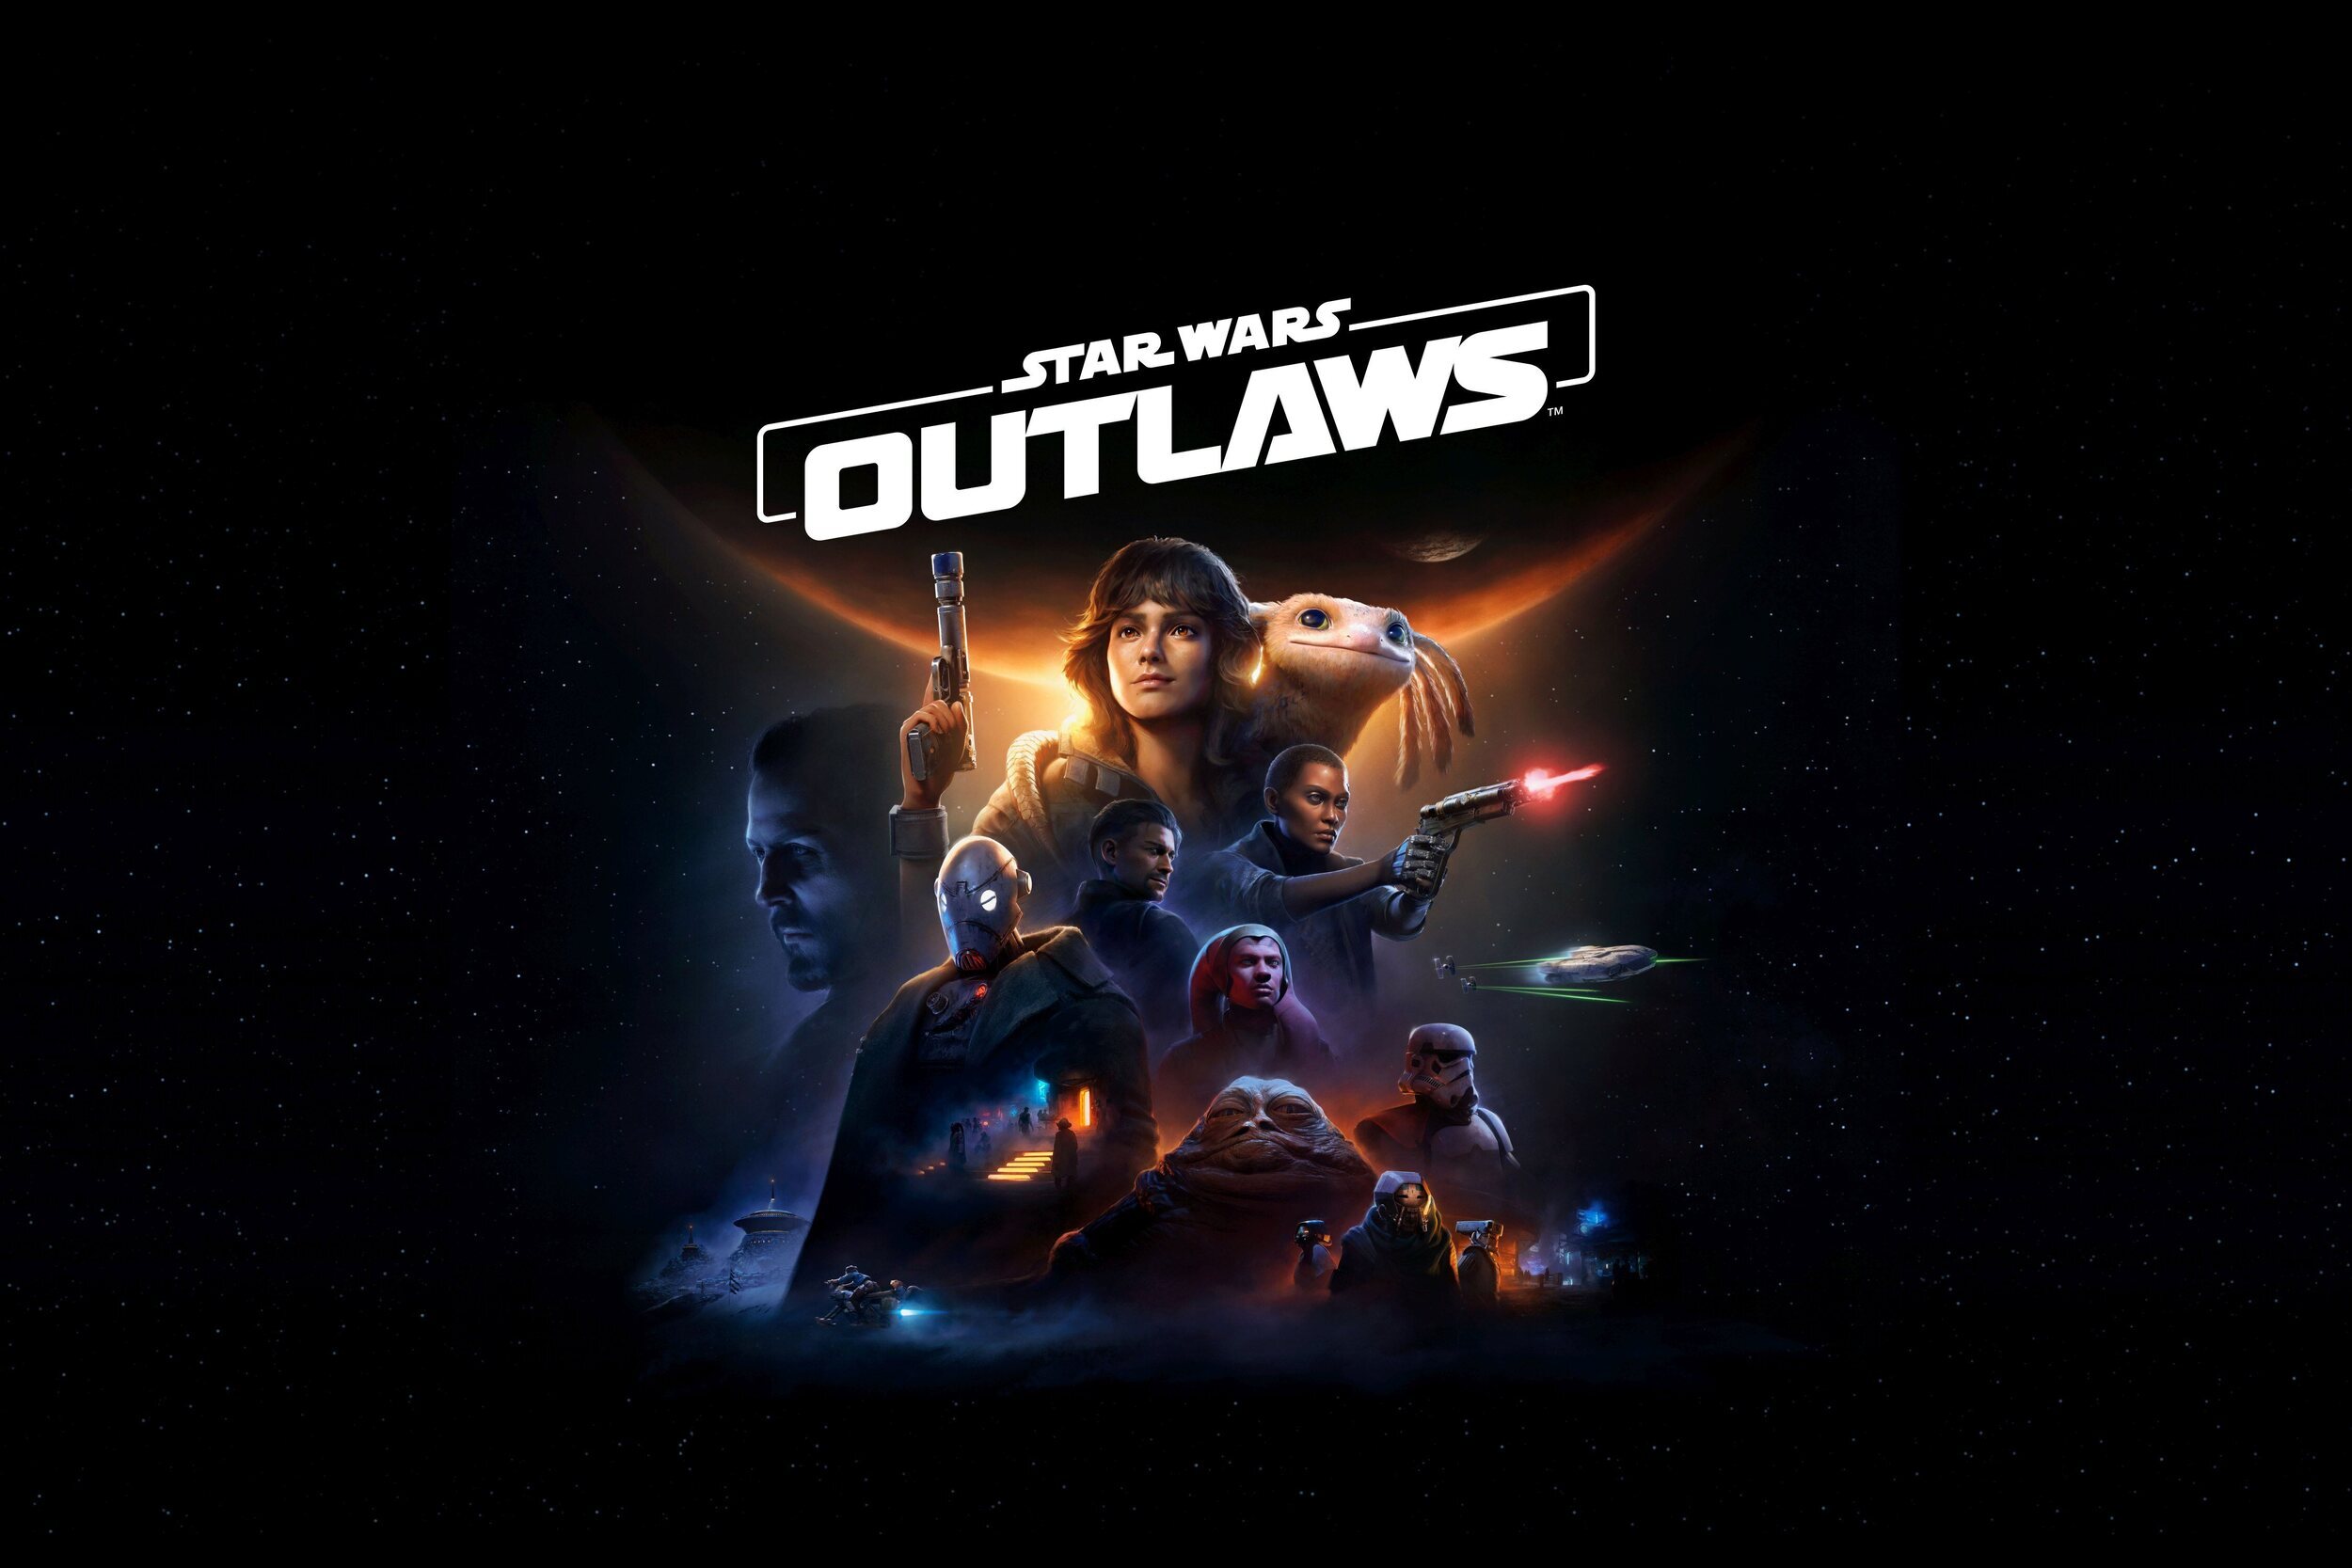 'Star Wars Outlaws'